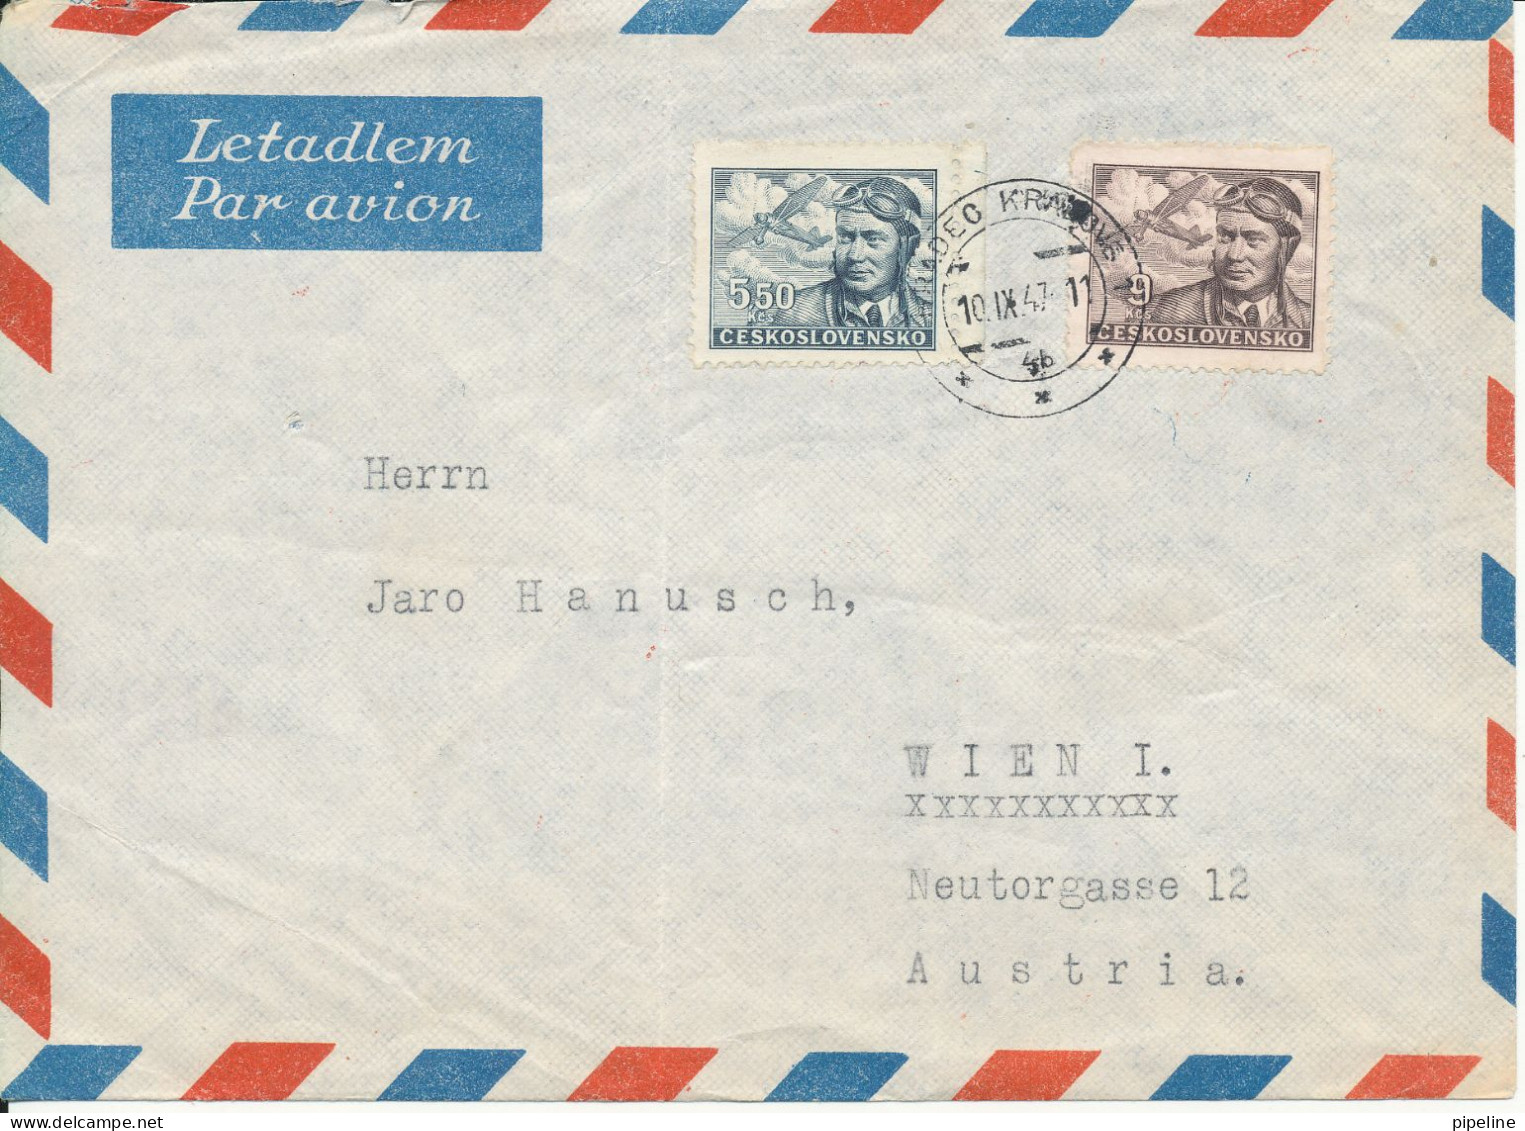 Czechoslovakia Air Mail Cover Sent To Denmark 10-9-1947 The Cover Is A Bit Folded And With Hinged Marks On The Backside - Luchtpost